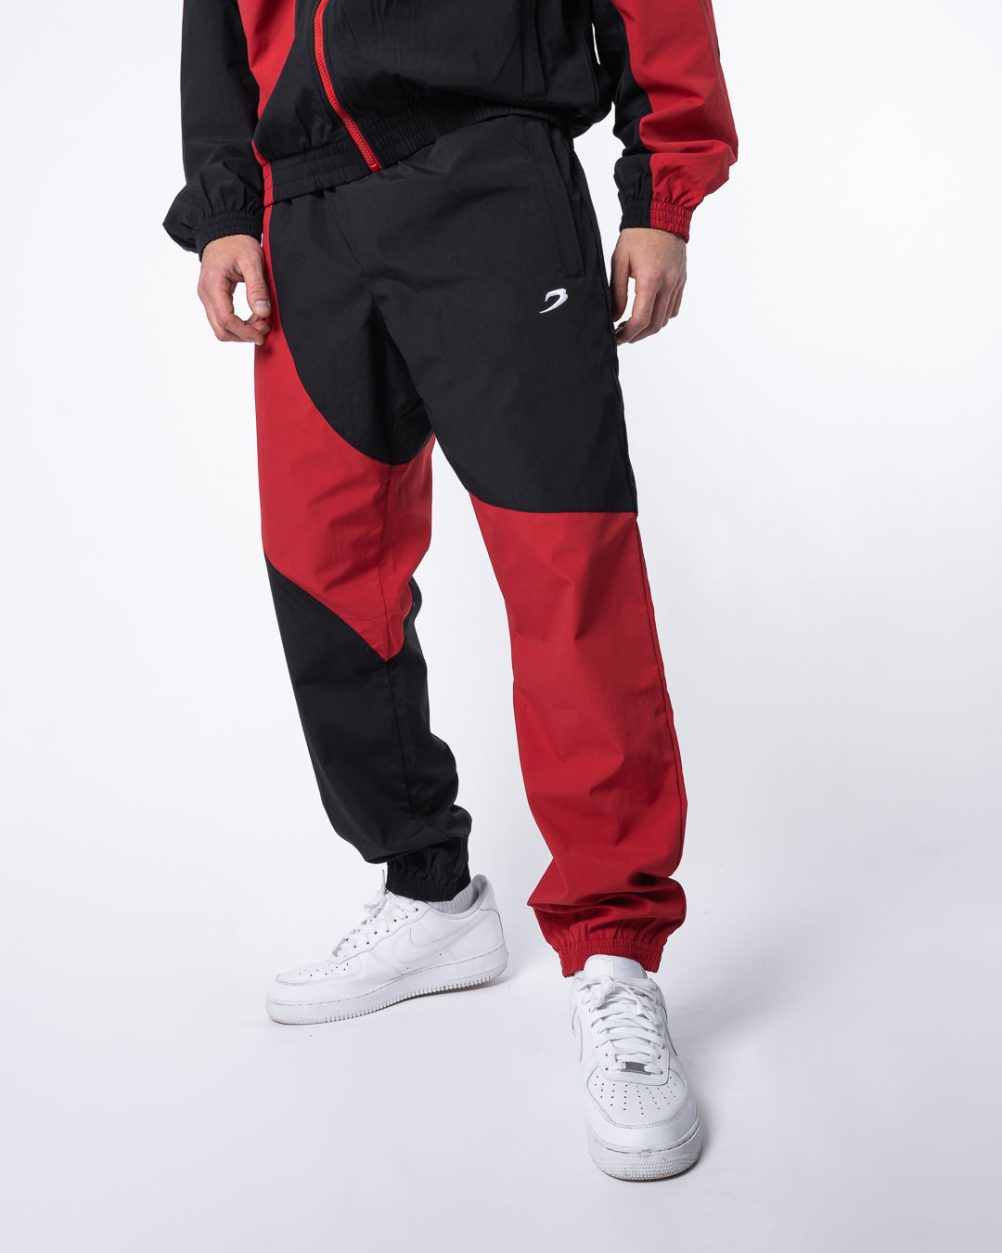 BOXRAW Williams Boxing Tracksuit Jacket and Pants